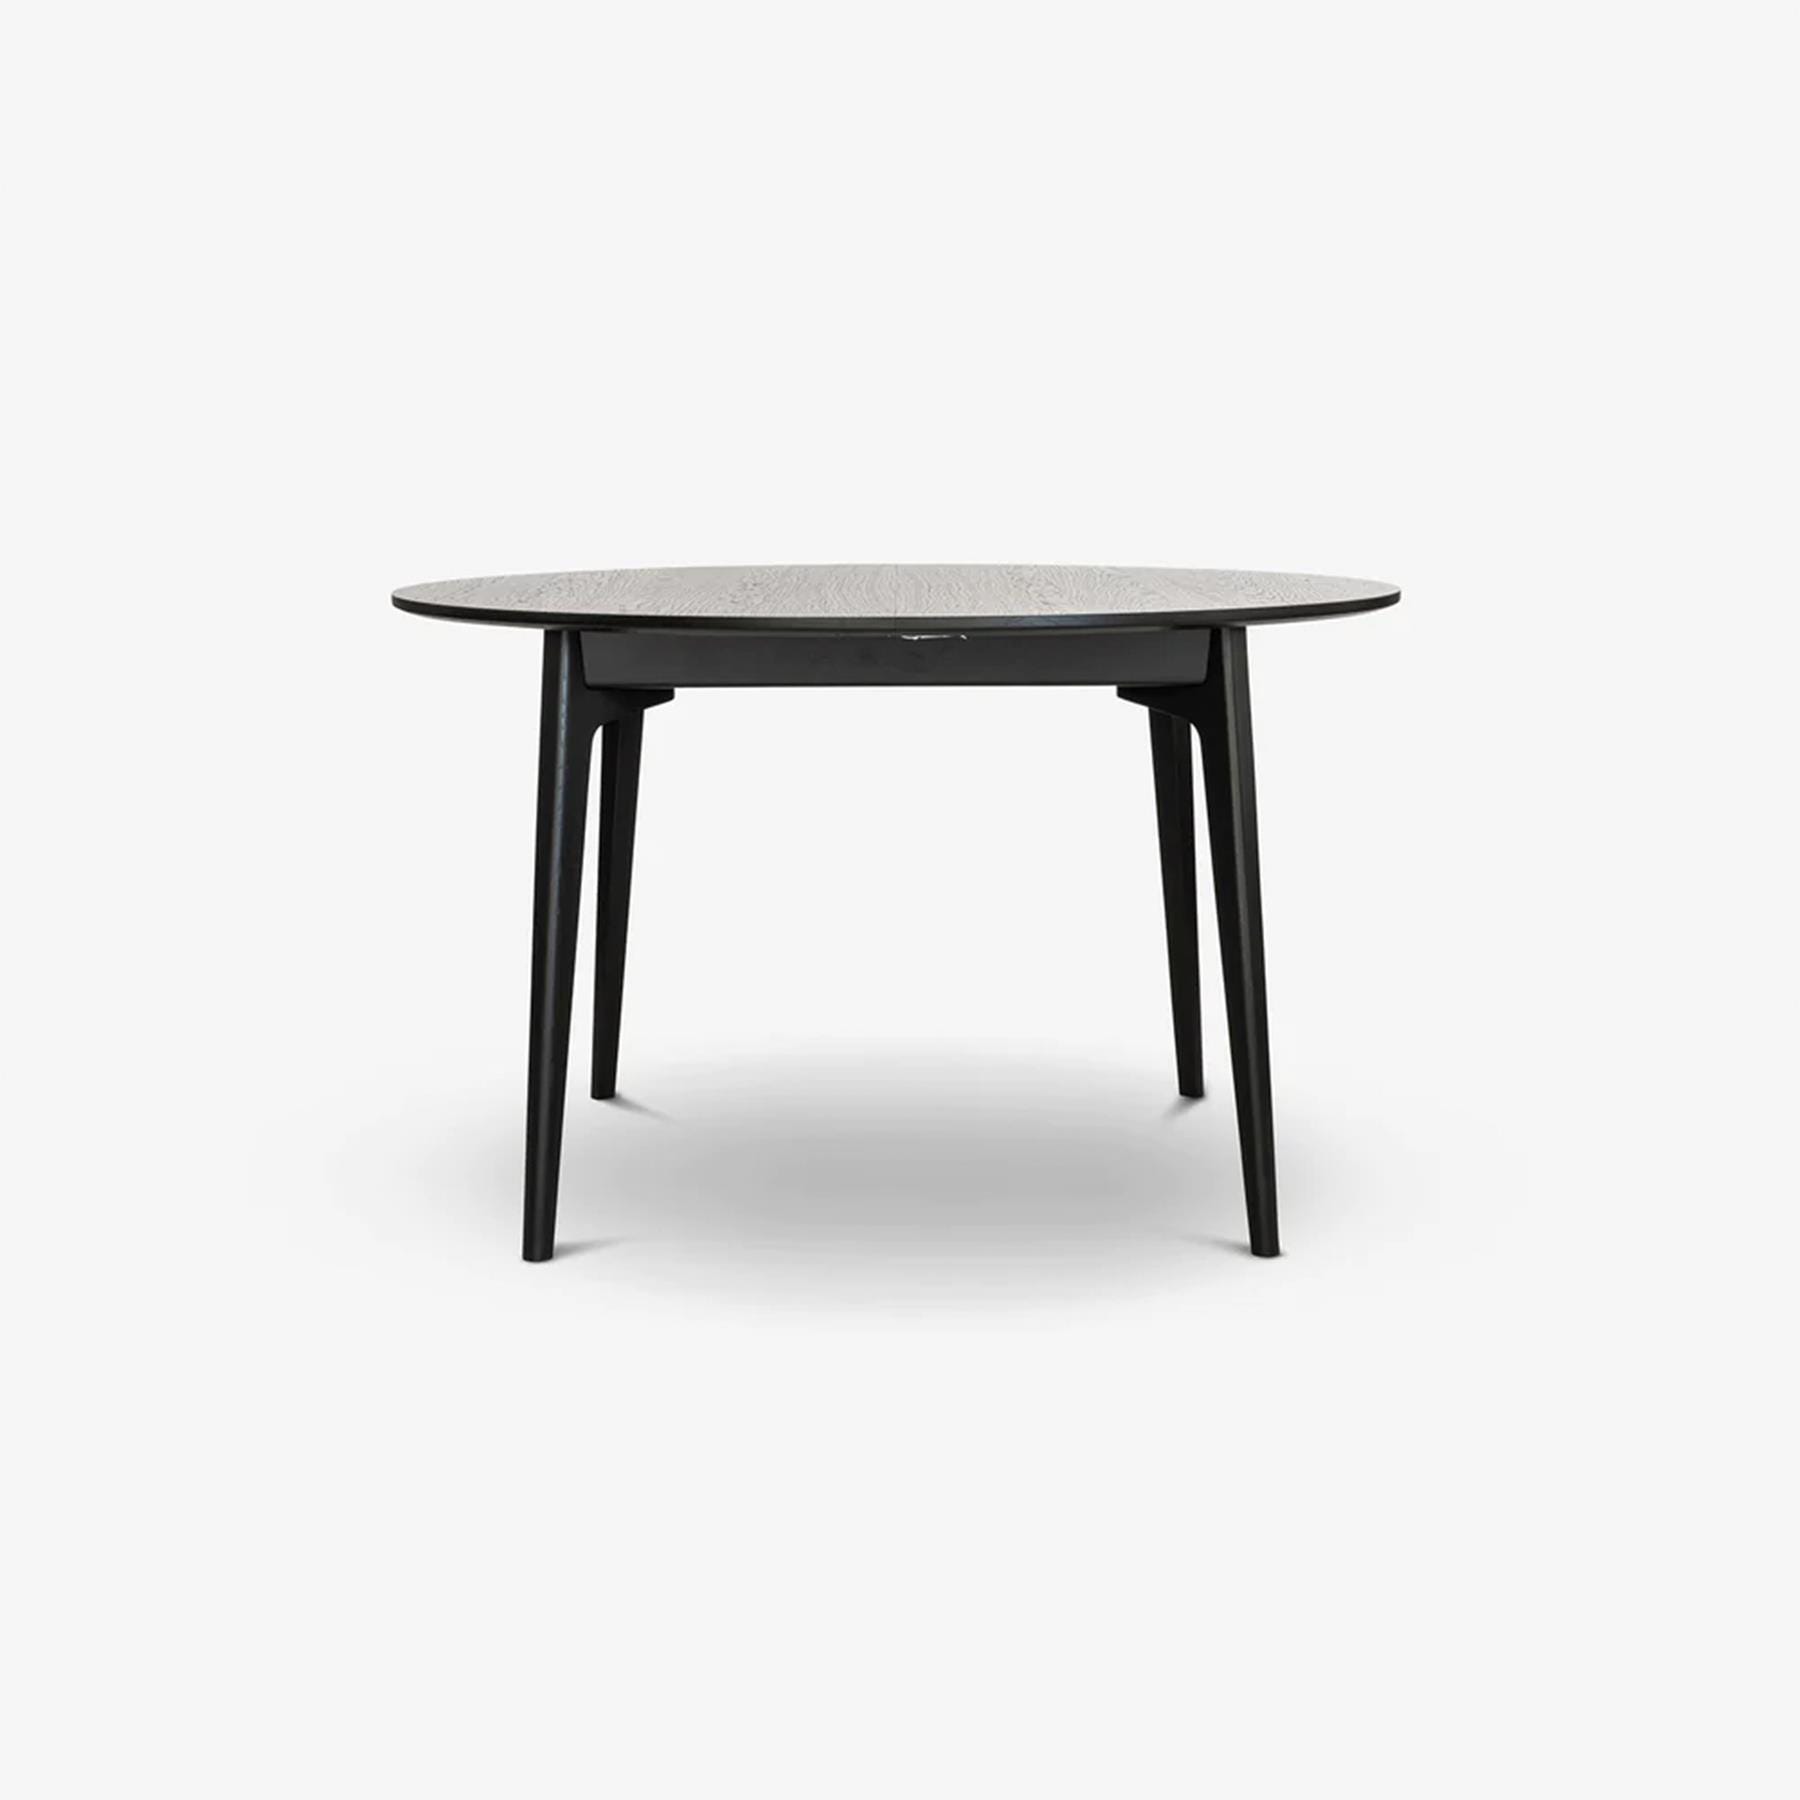 Case Furniture Dulwich Round Extending Table Black Designer Furniture From Holloways Of Ludlow